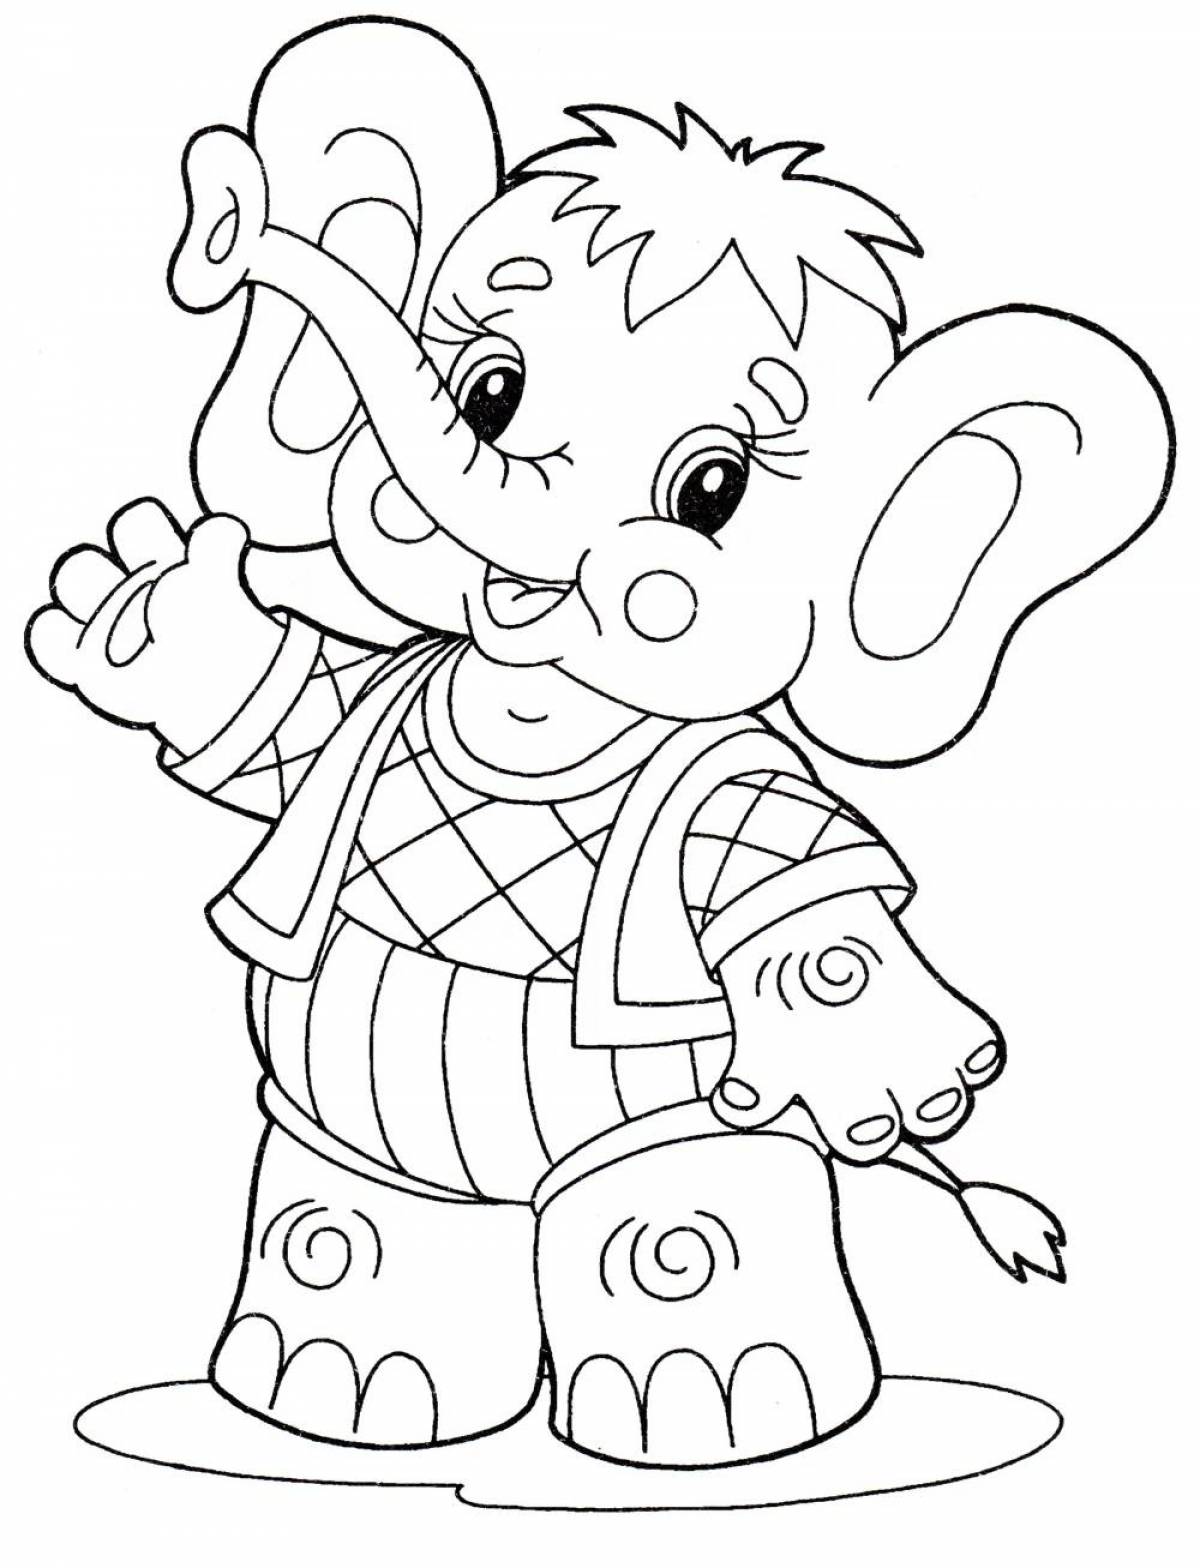 Exotic elephant coloring book for kids